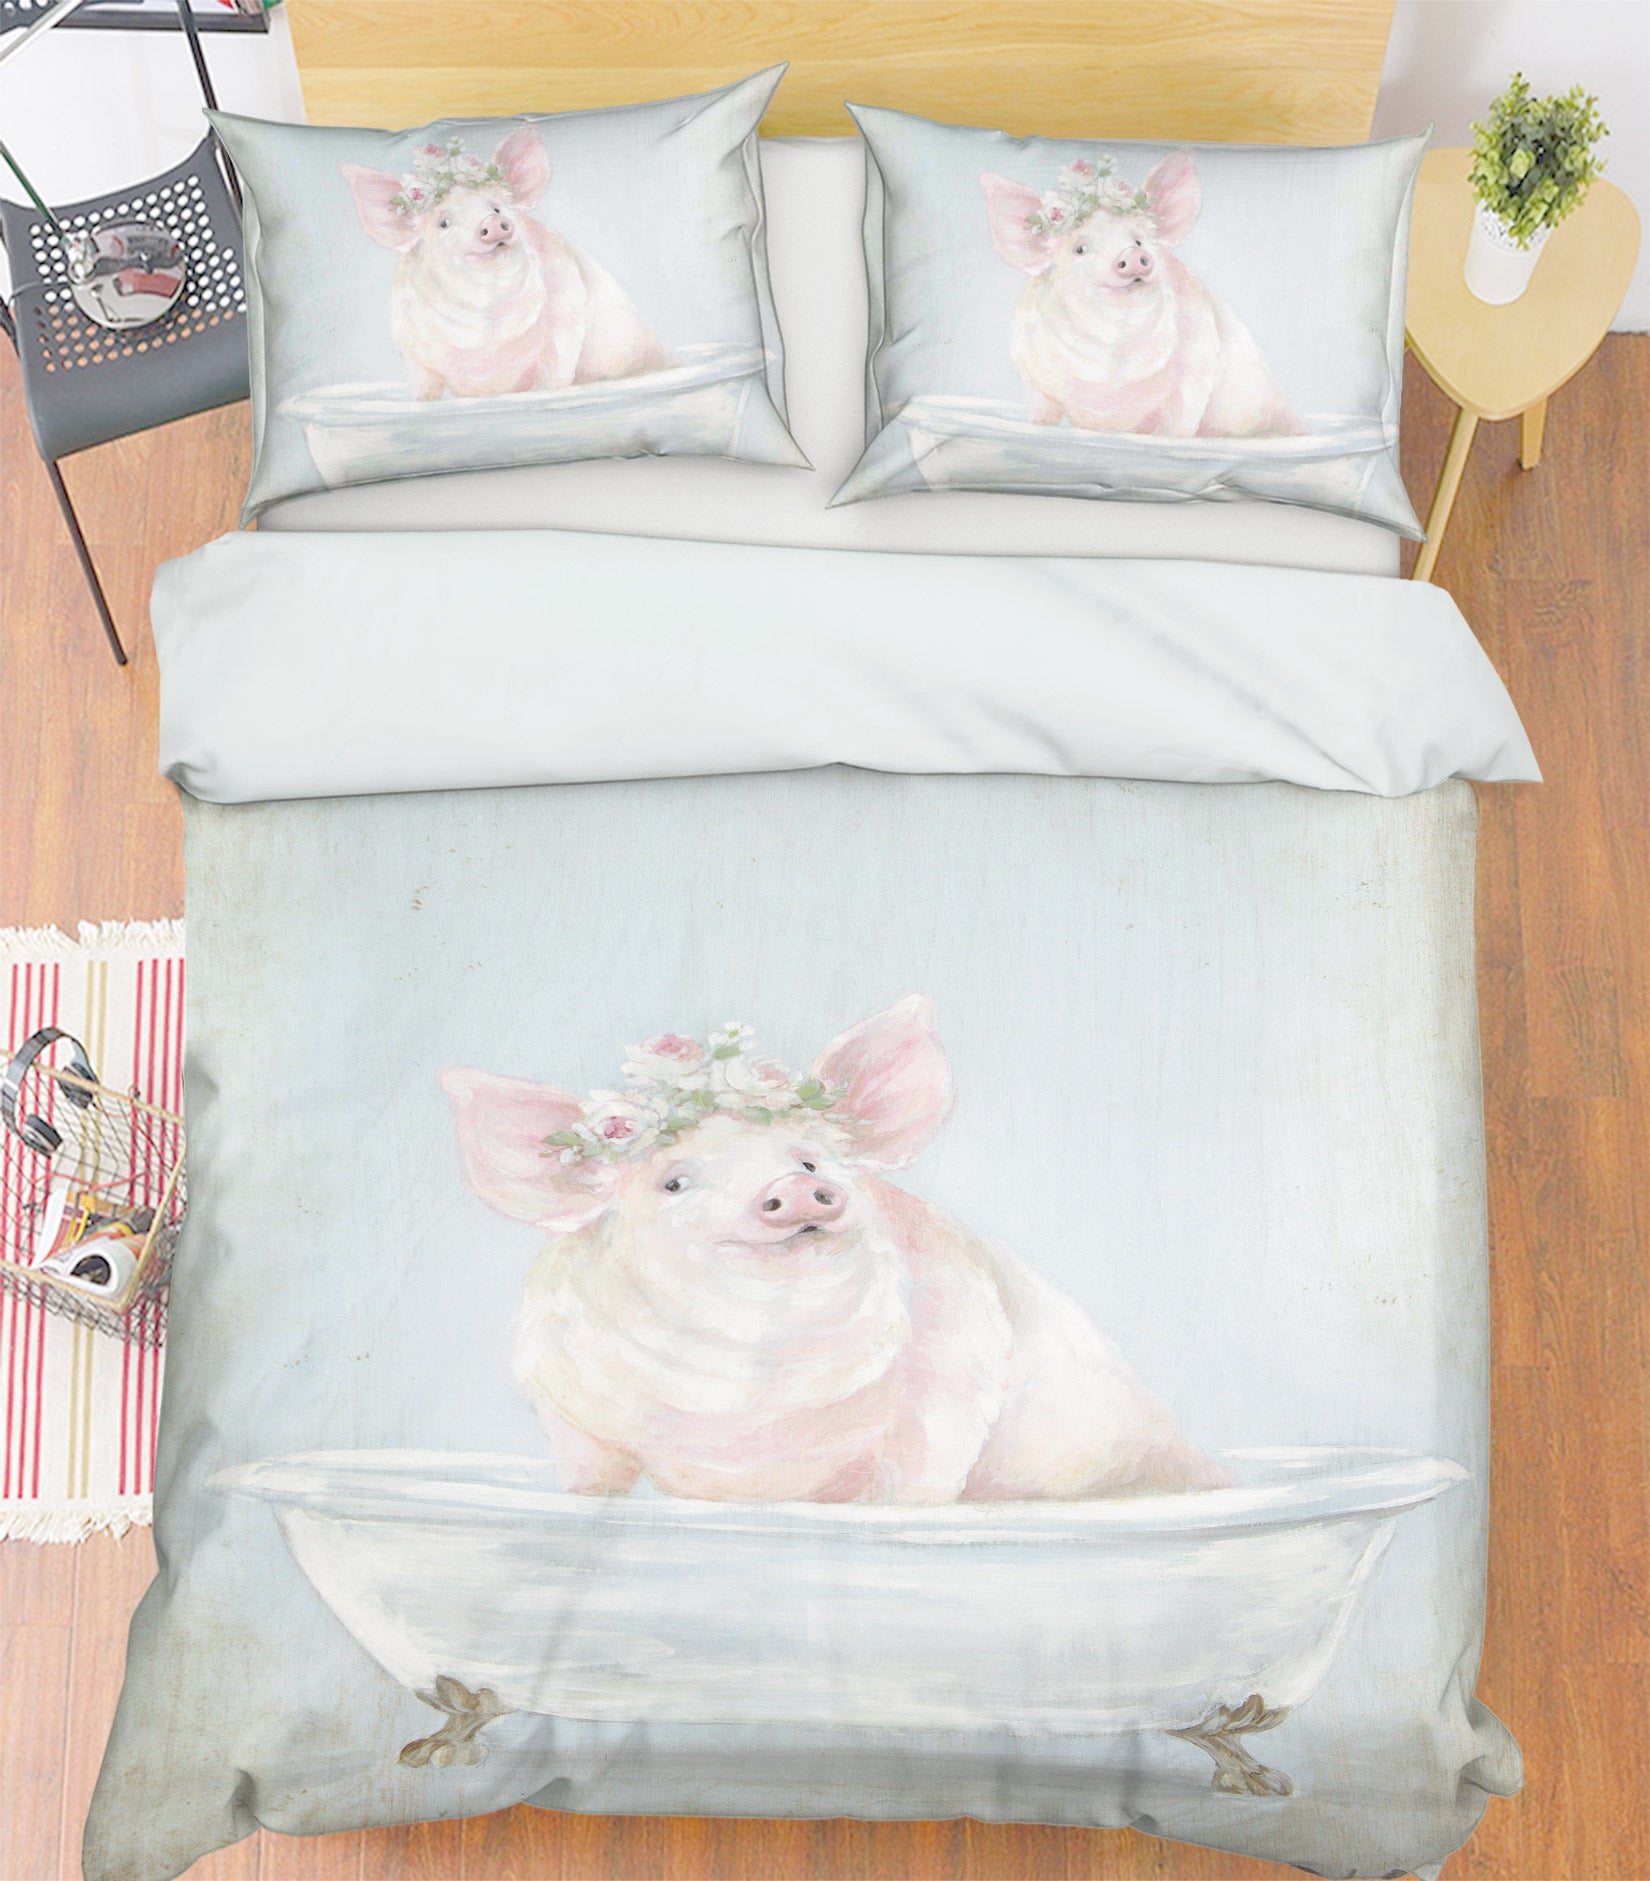 3D Wreath Pig Tub 2121 Debi Coules Bedding Bed Pillowcases Quilt